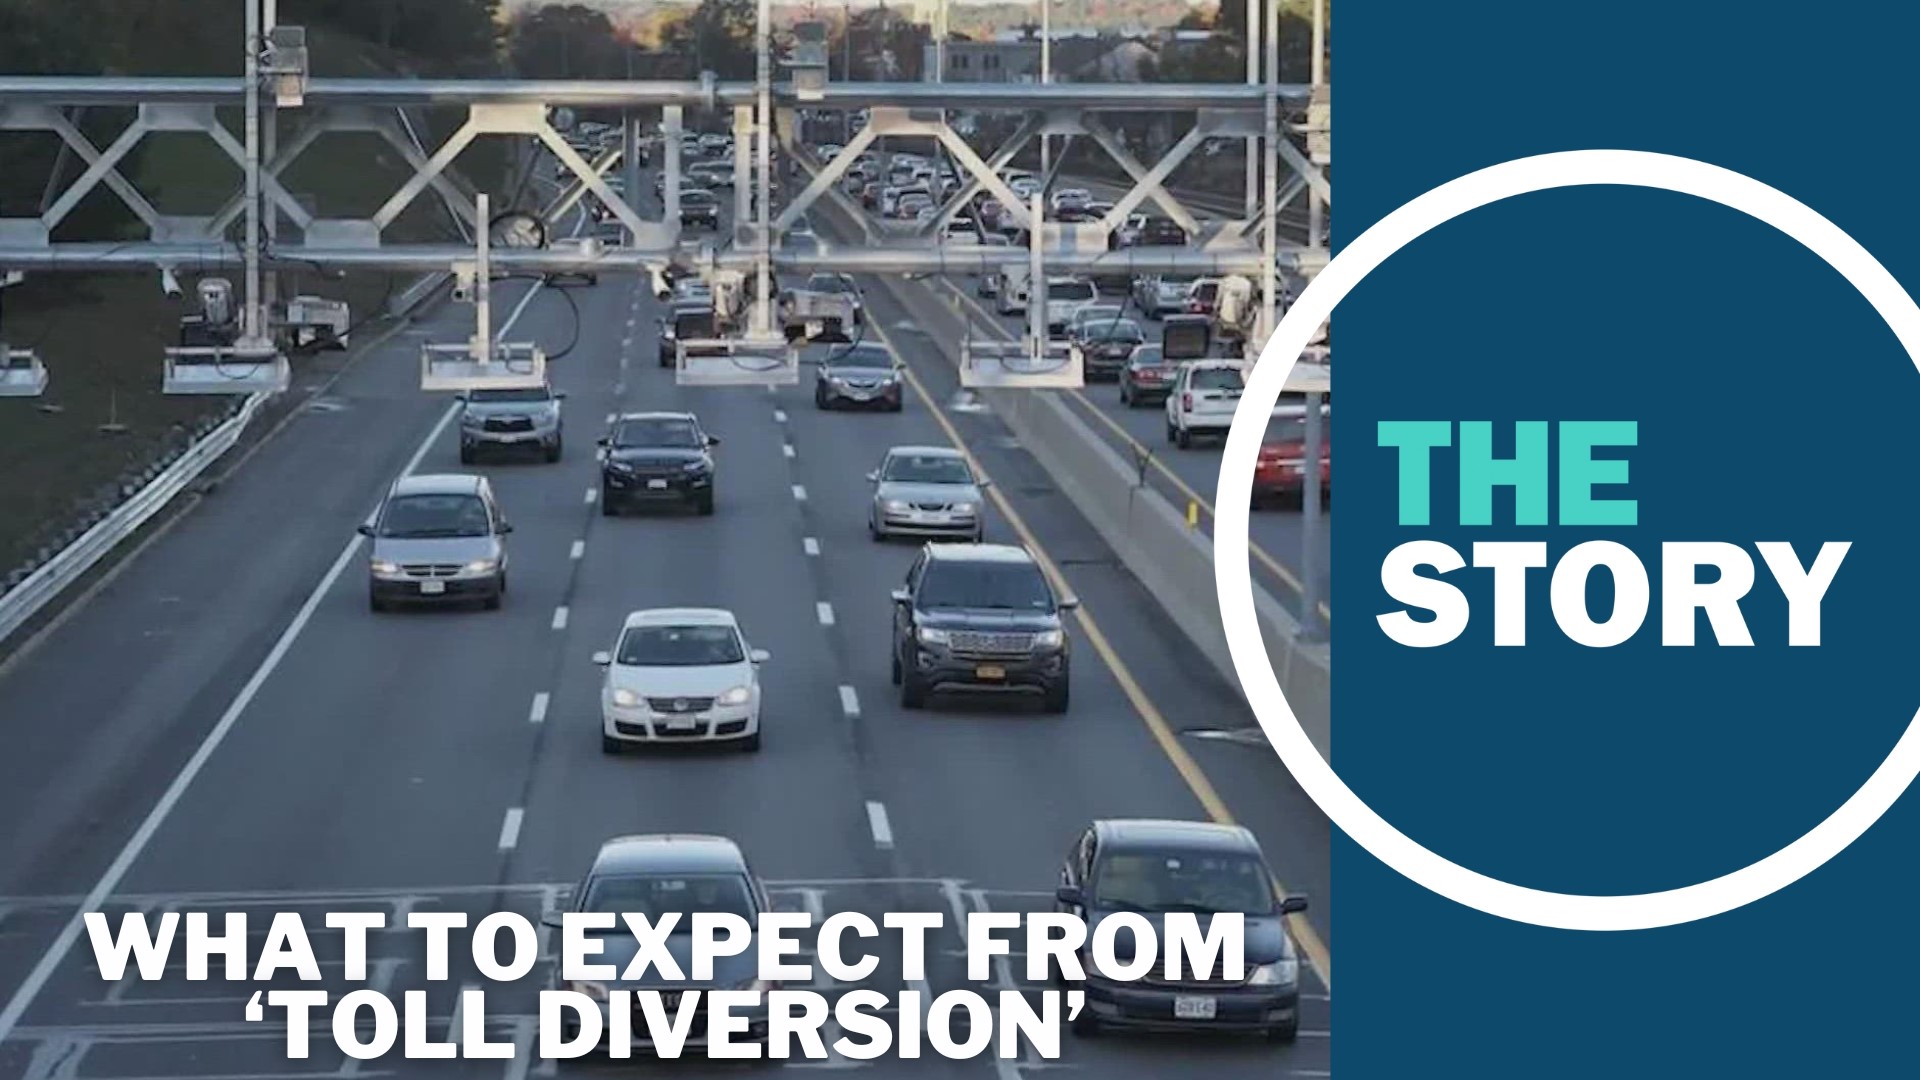 An inevitable byproduct of tolling on I-205 and I-5 will be "toll diversion," changes to traffic as drivers attempt to avoid paying the fees.